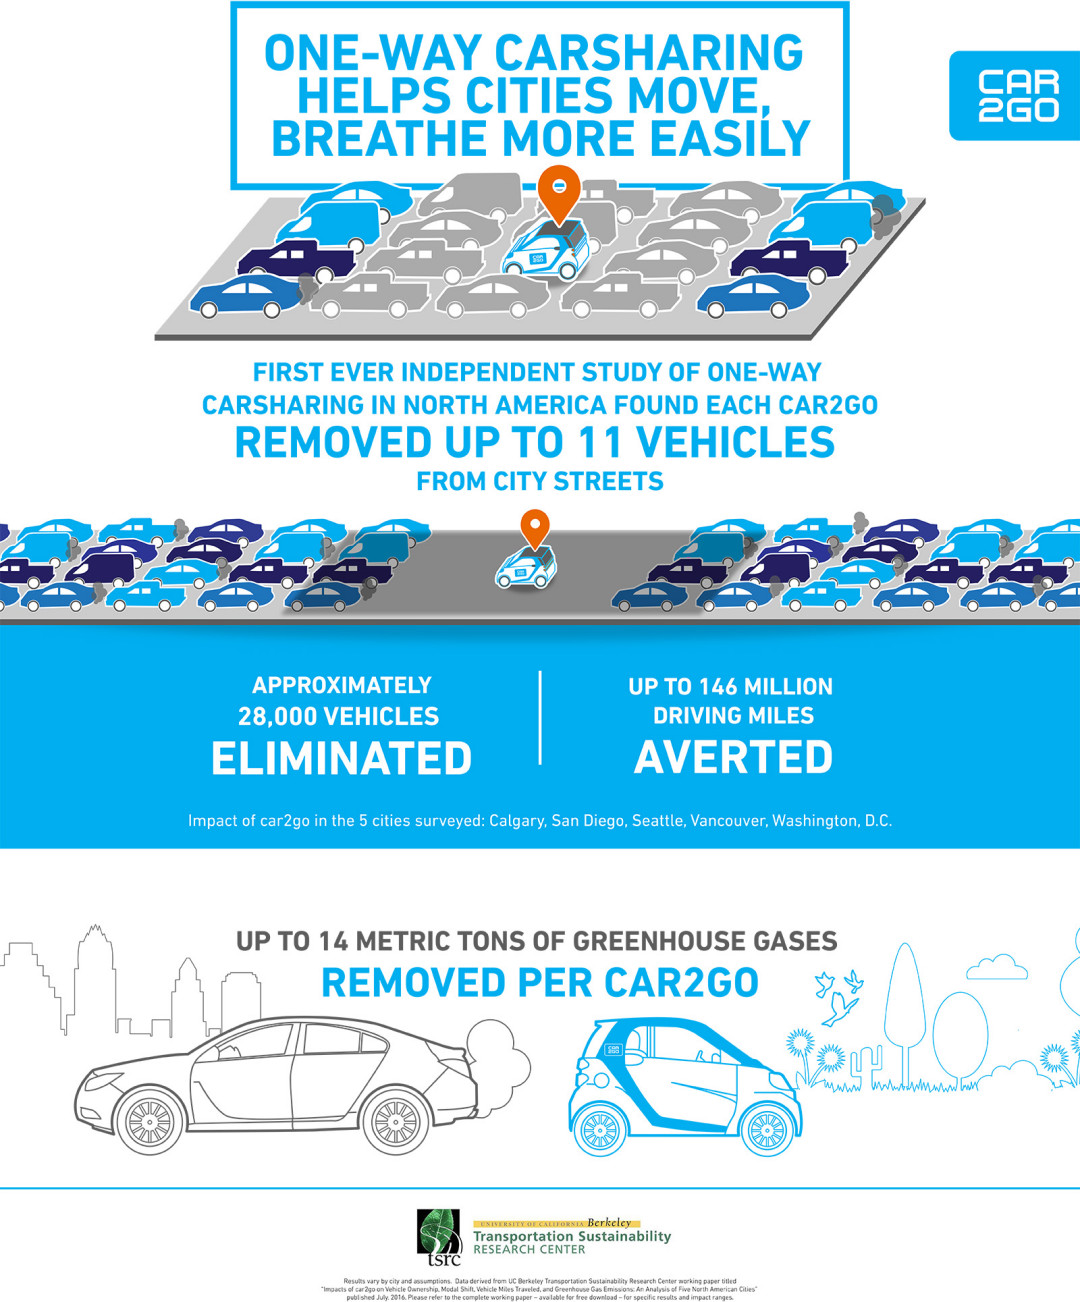 Driving Down GHG Emissions with Carsharing